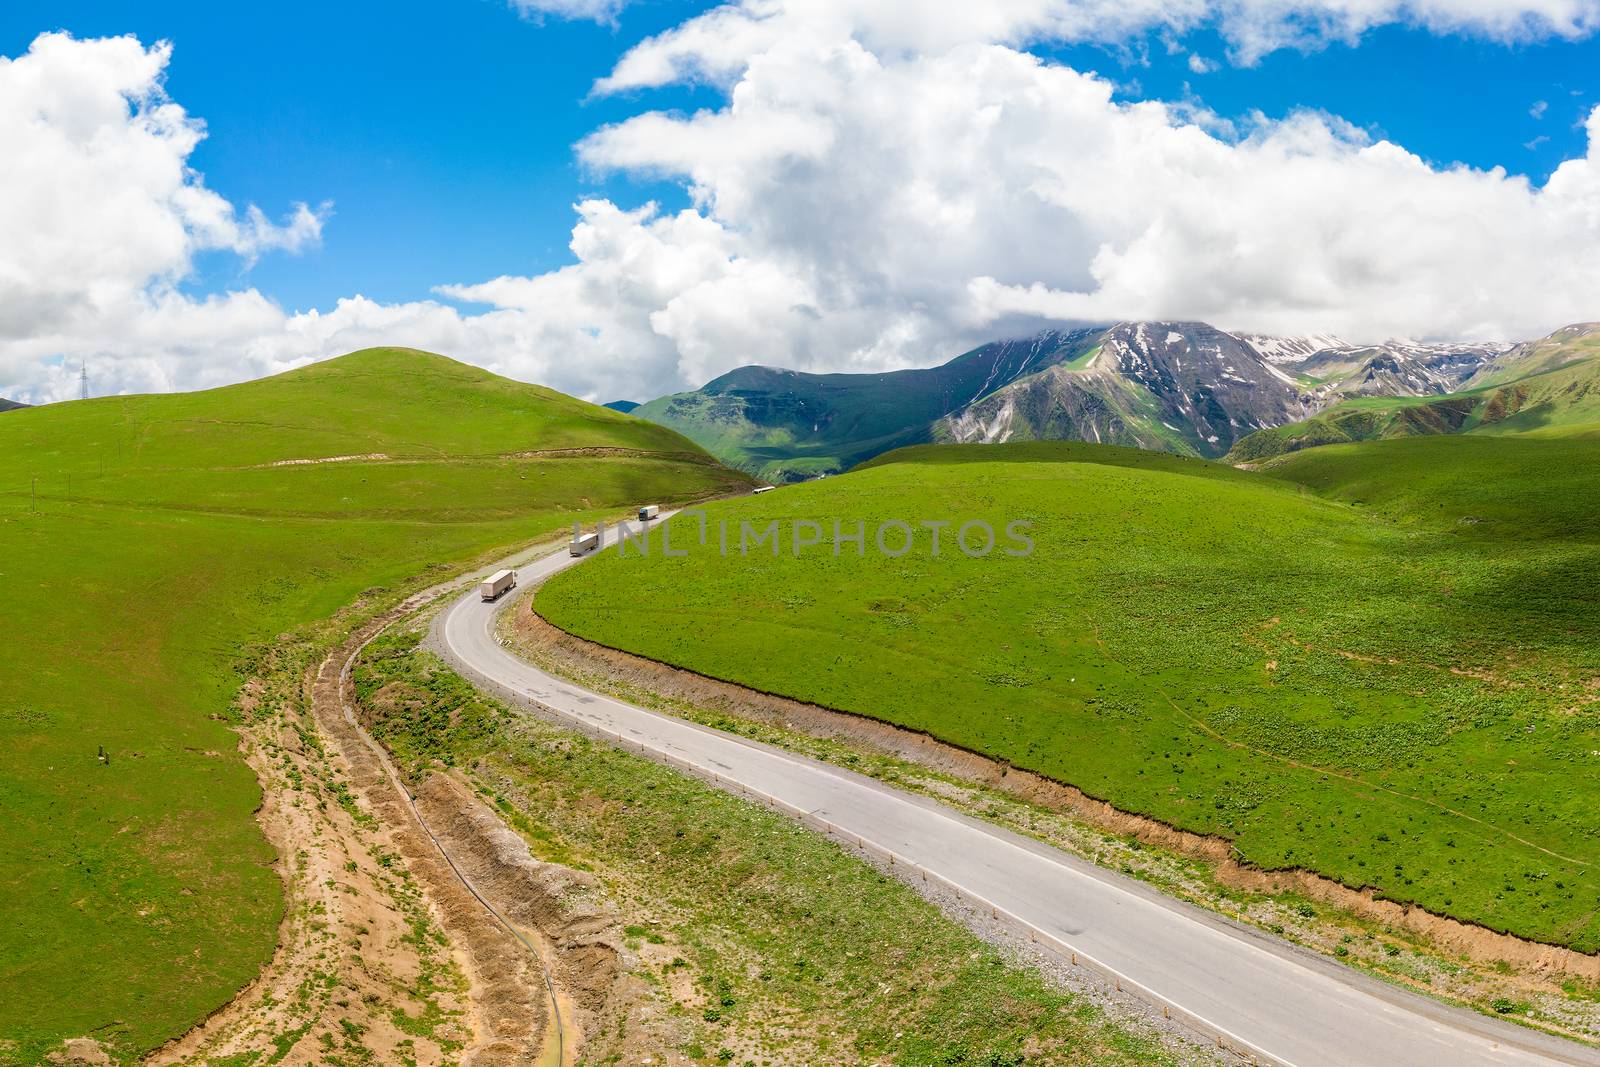 Wagons on a mountain road, scenic landscape from quadrocopter to by kosmsos111